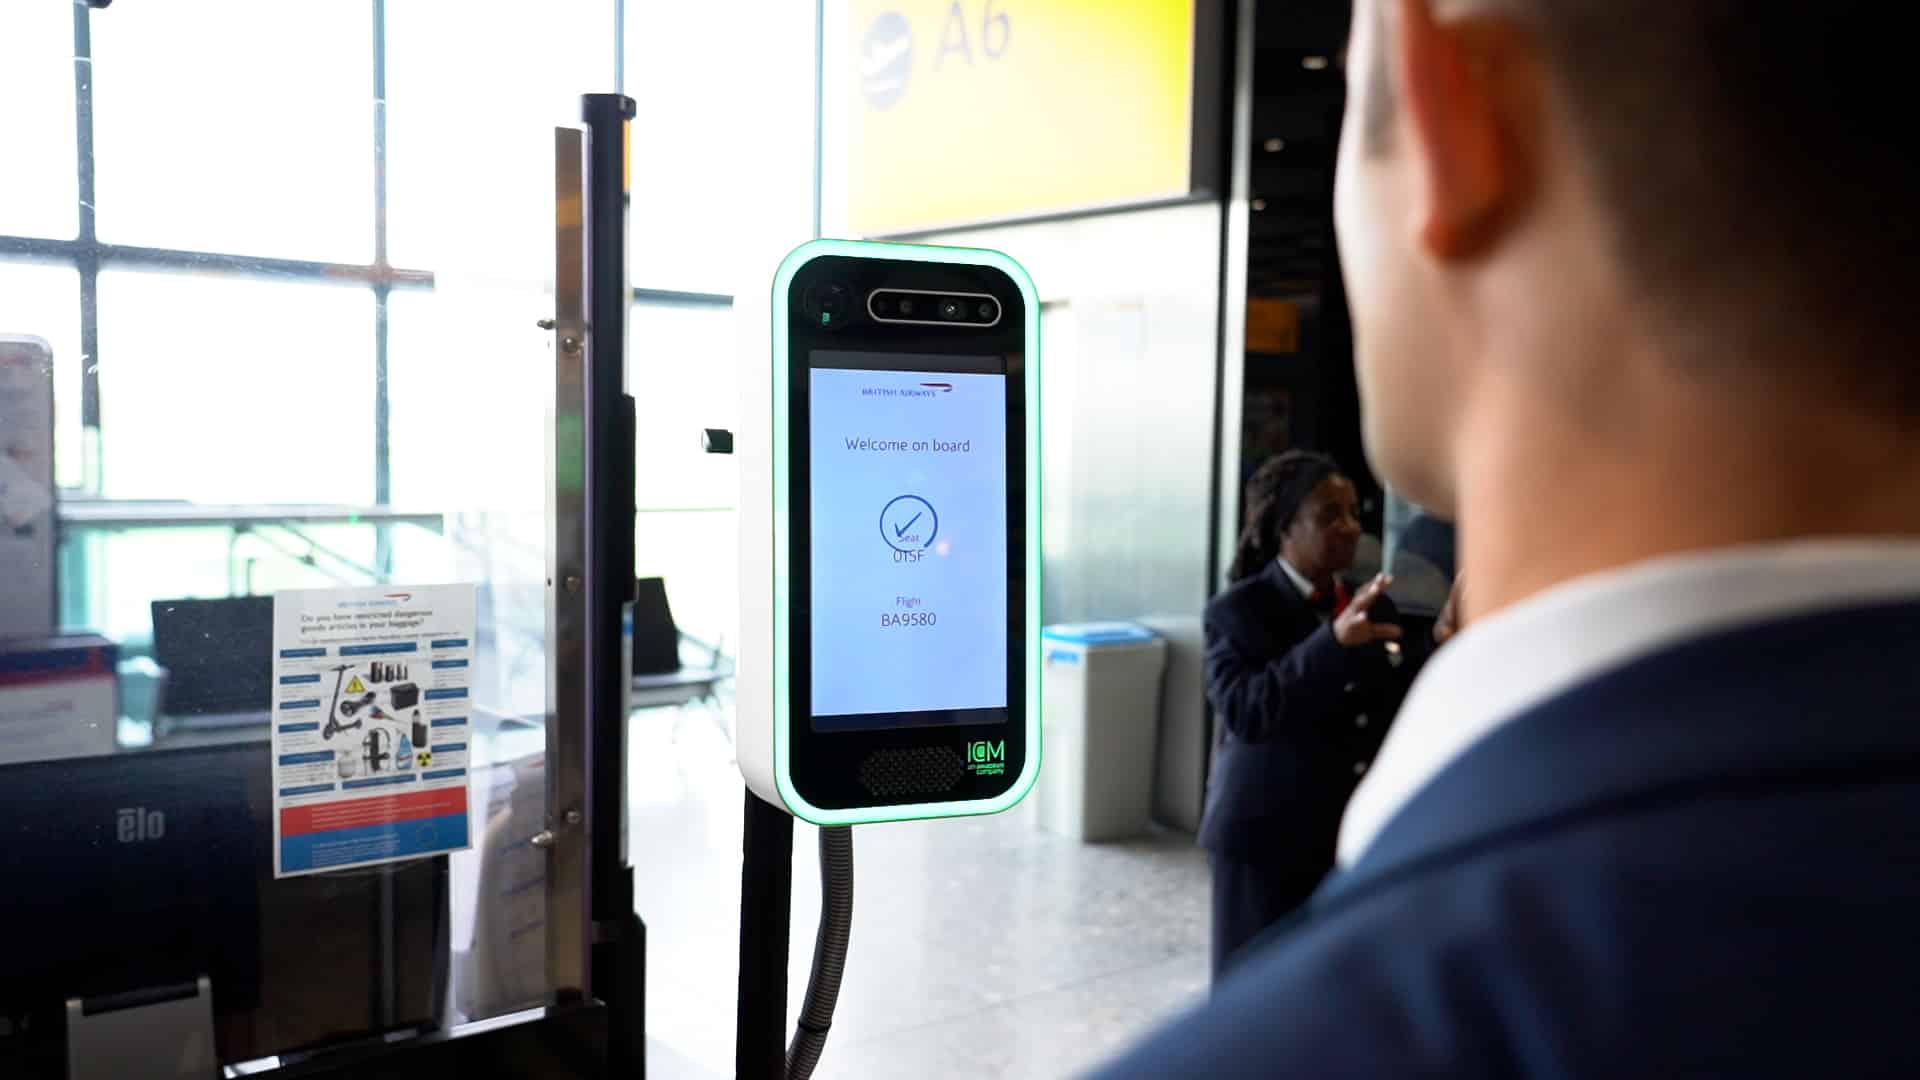 British Airways (BA) became the first UK airline to trial the use of biometric technology for international flights